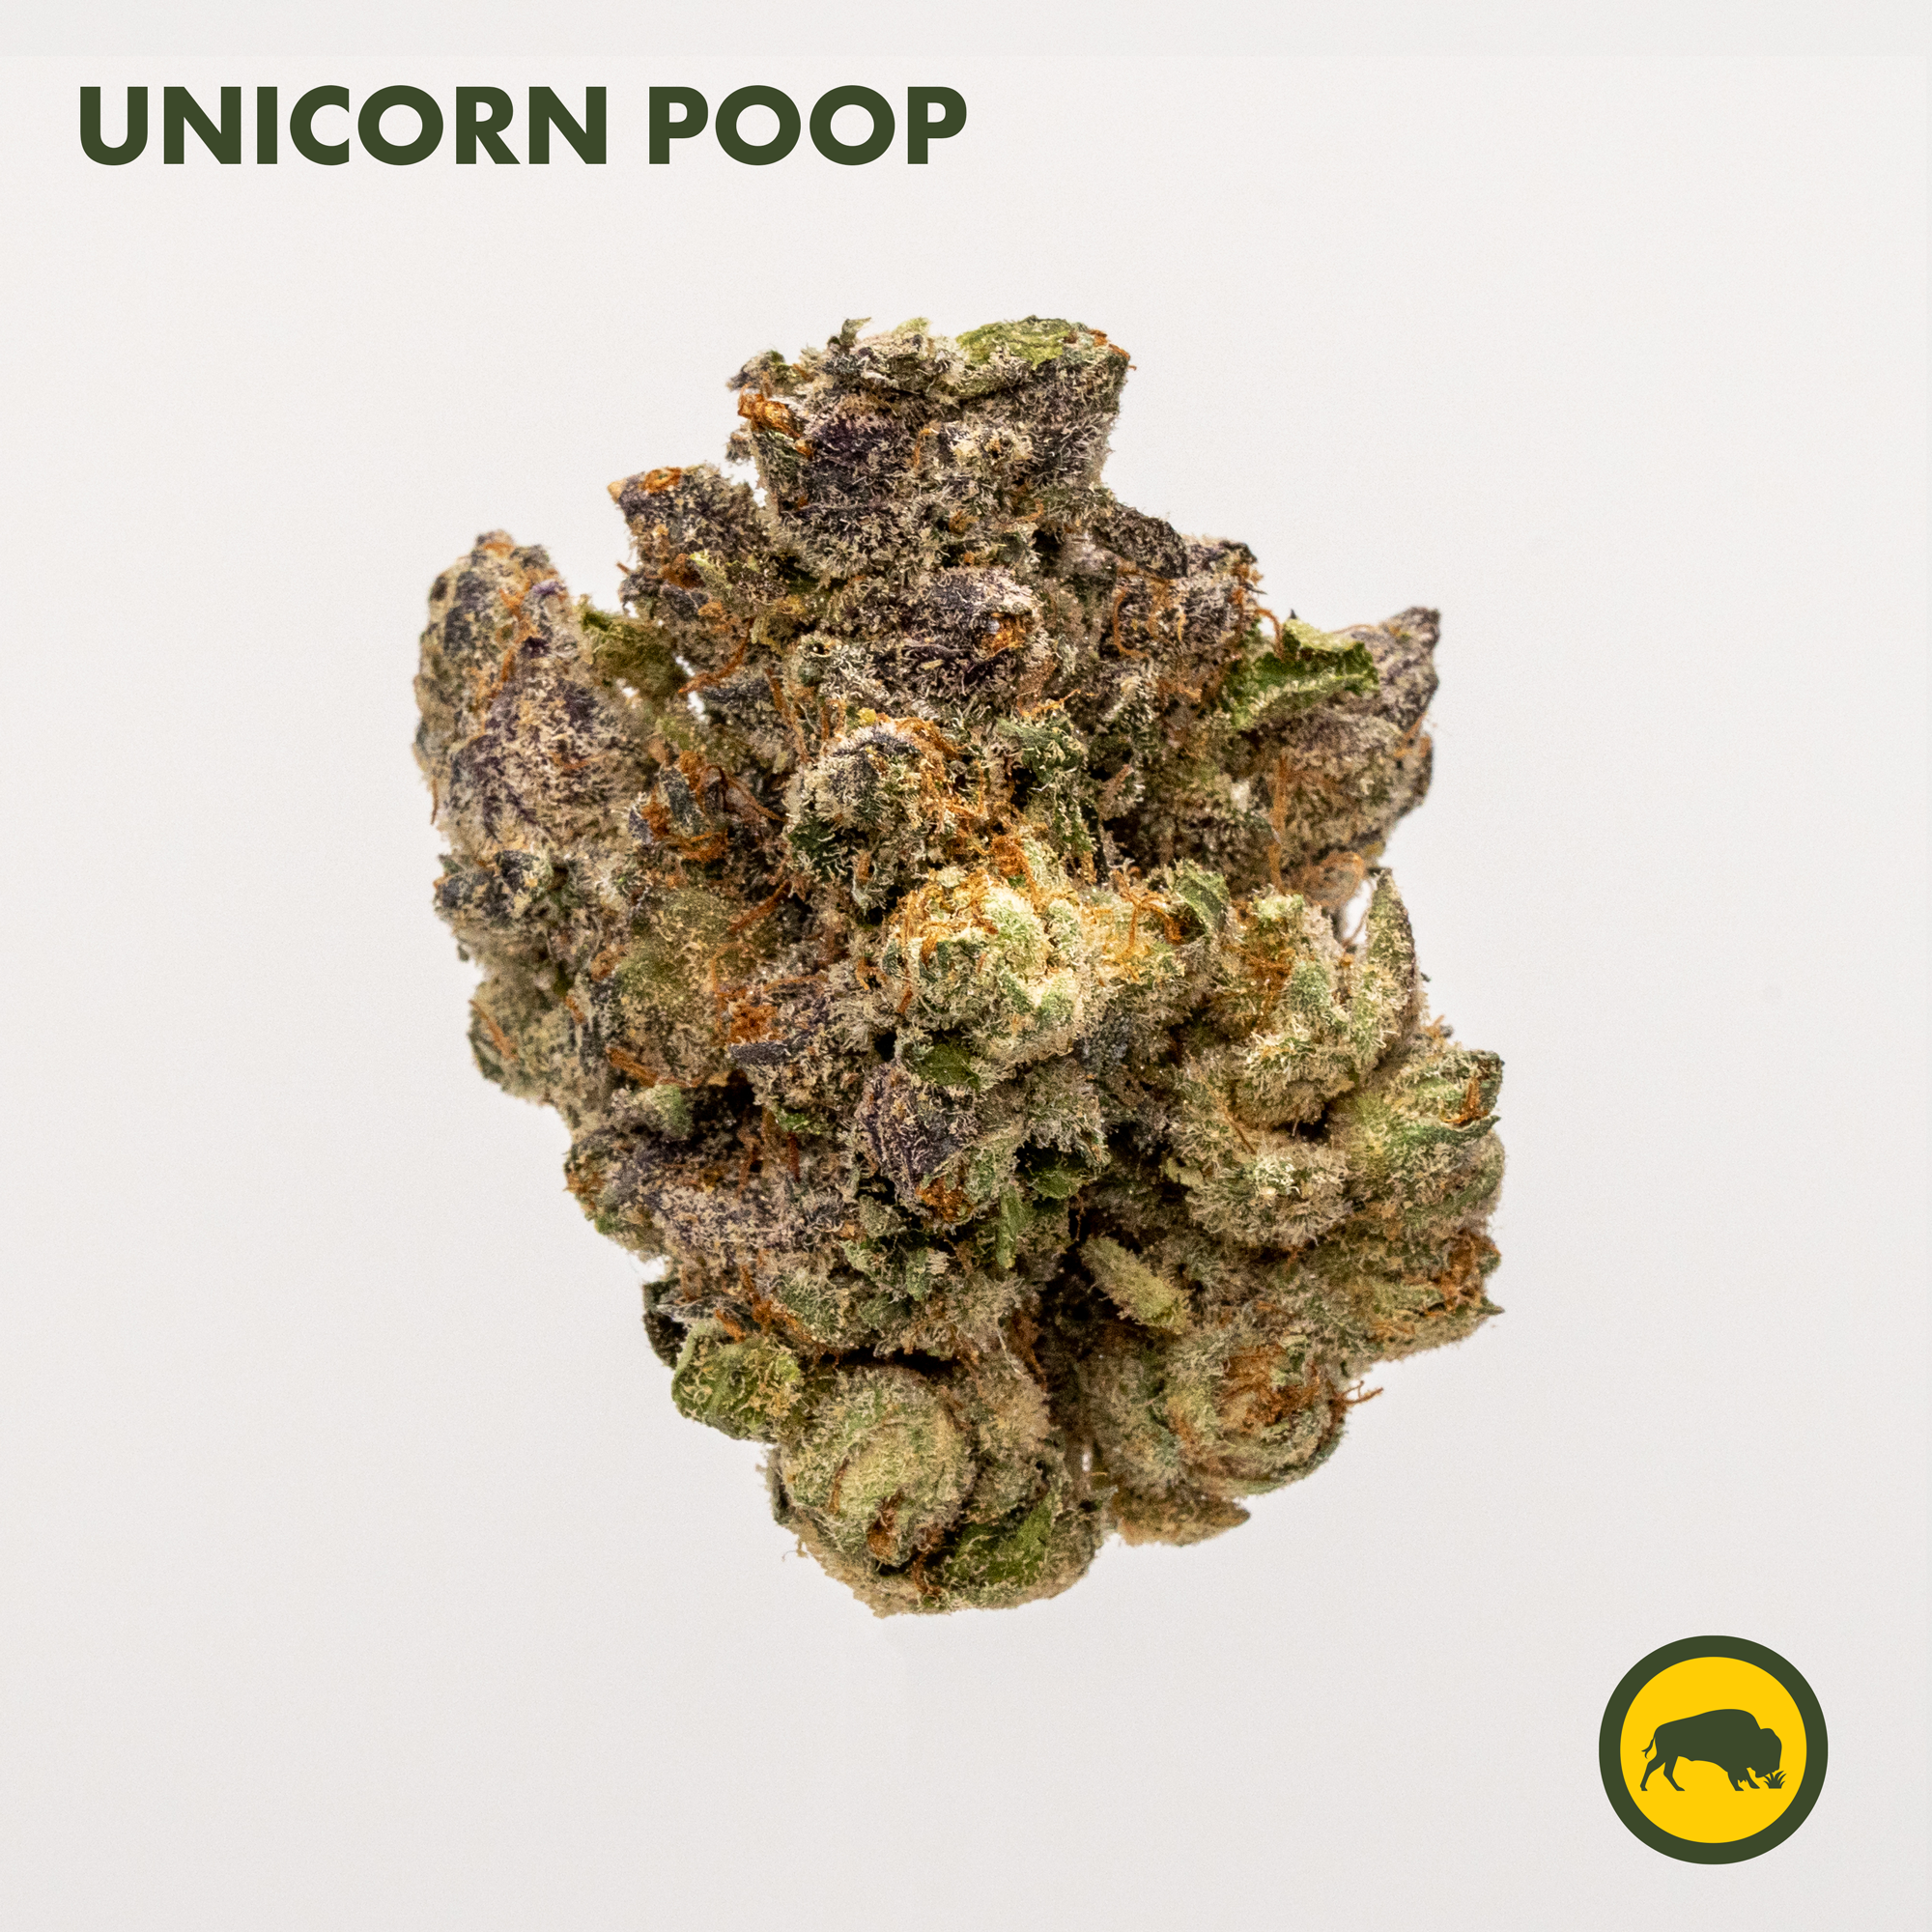 Unicorn Poop cultivated by Beforeland Farm is a 50/50 hybrid that tested at 18.57% THC. This batch is part of Bison Botanic's Select line of cannabis flower. 